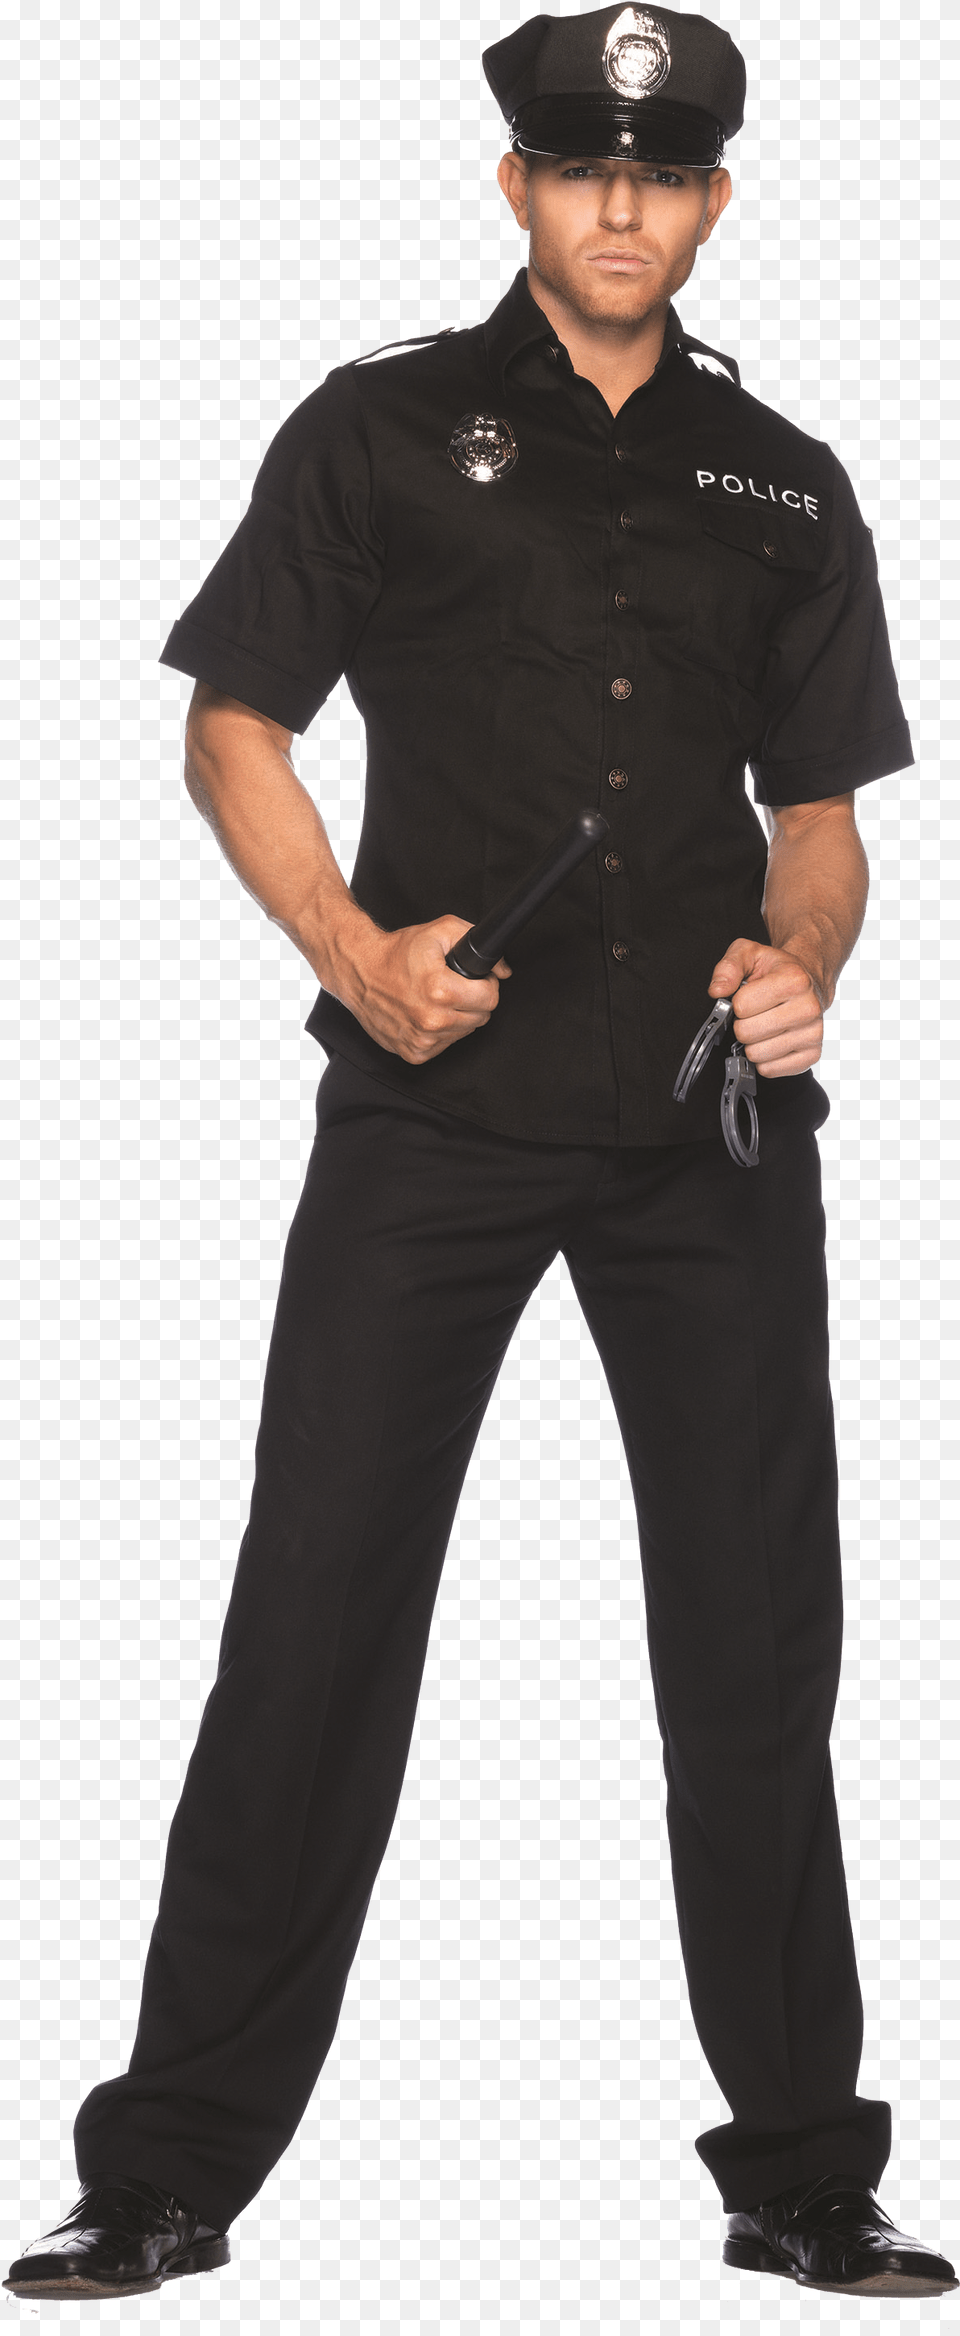 Policeman Police Officer Costume Man, Adult, Person, Pants, Male Png Image